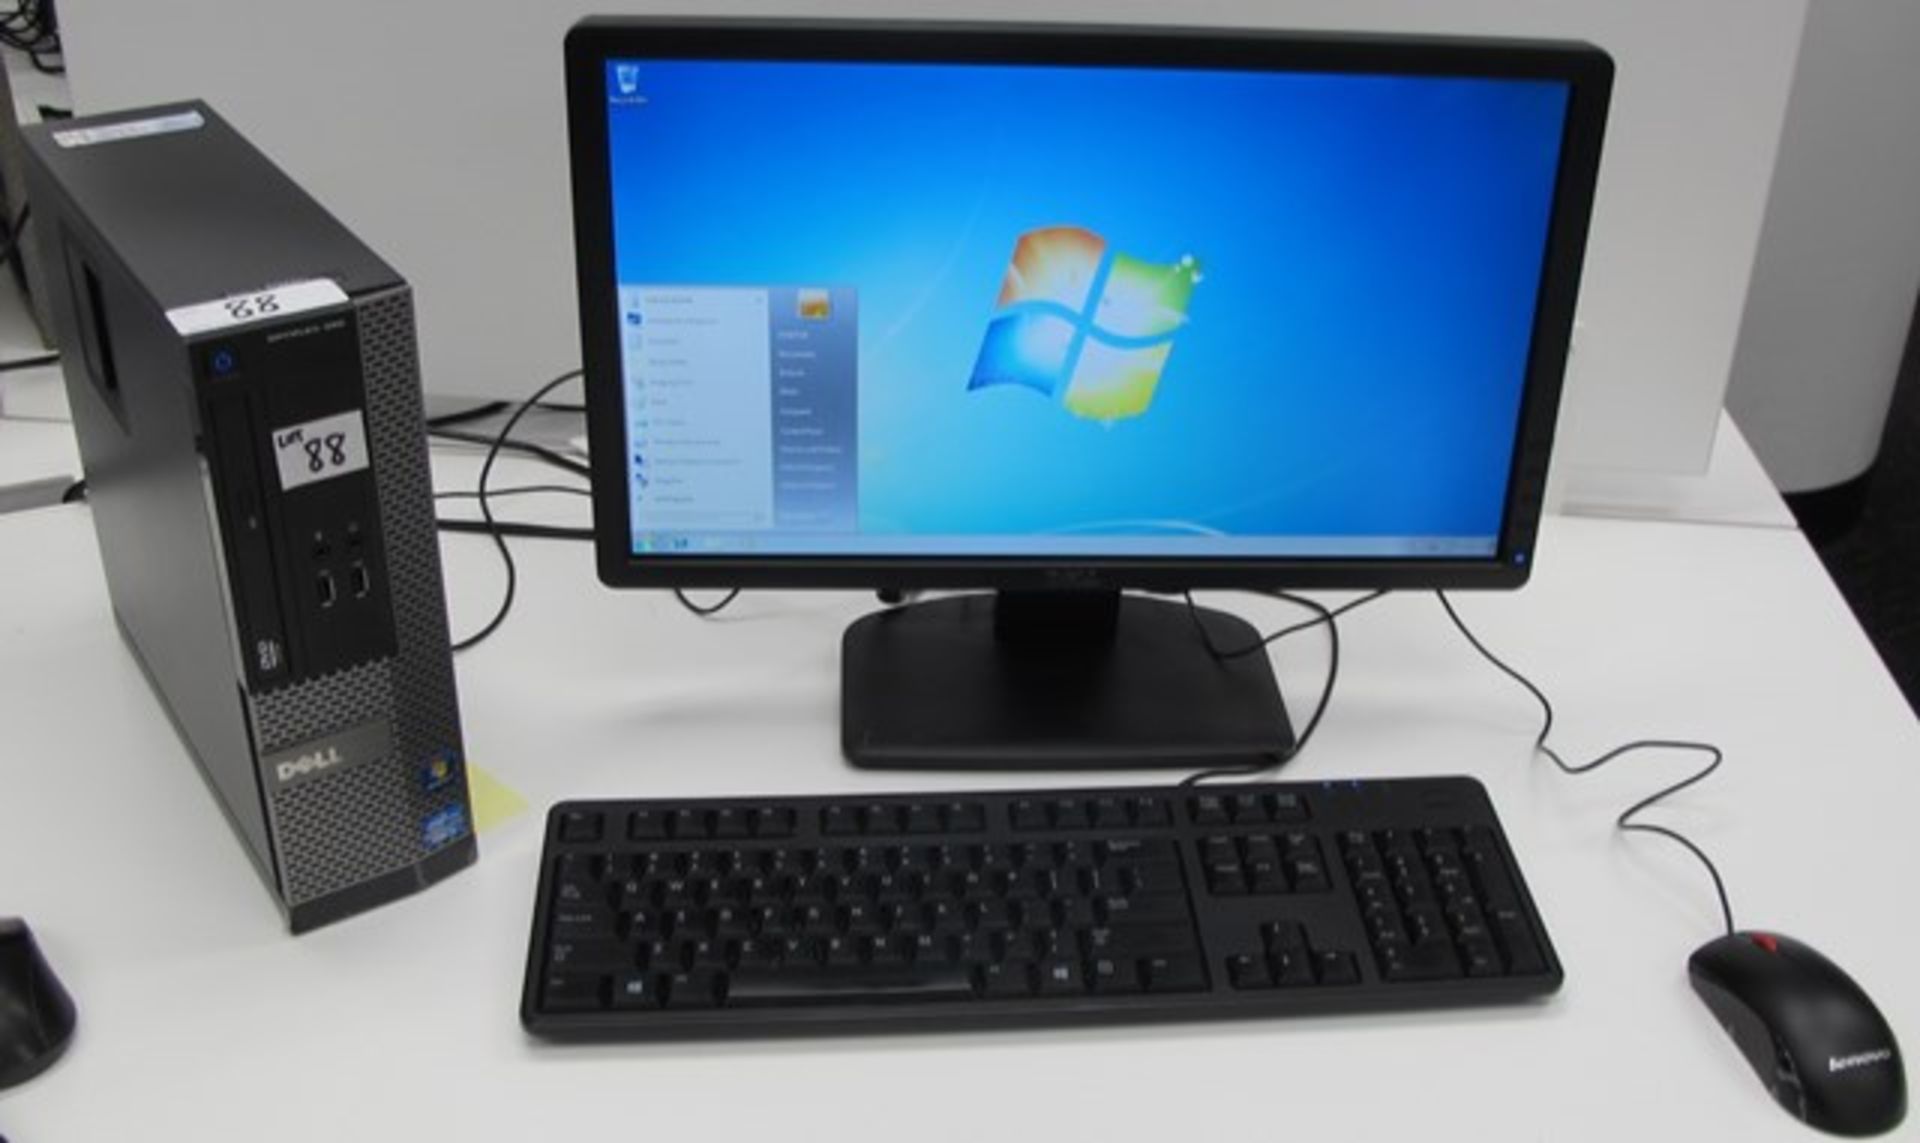 DELL OPTIPLEX 390 i3 TOWER COMPUTER W/ MONITOR, KEYBOARD, MOUSE (WINDOWS 7)